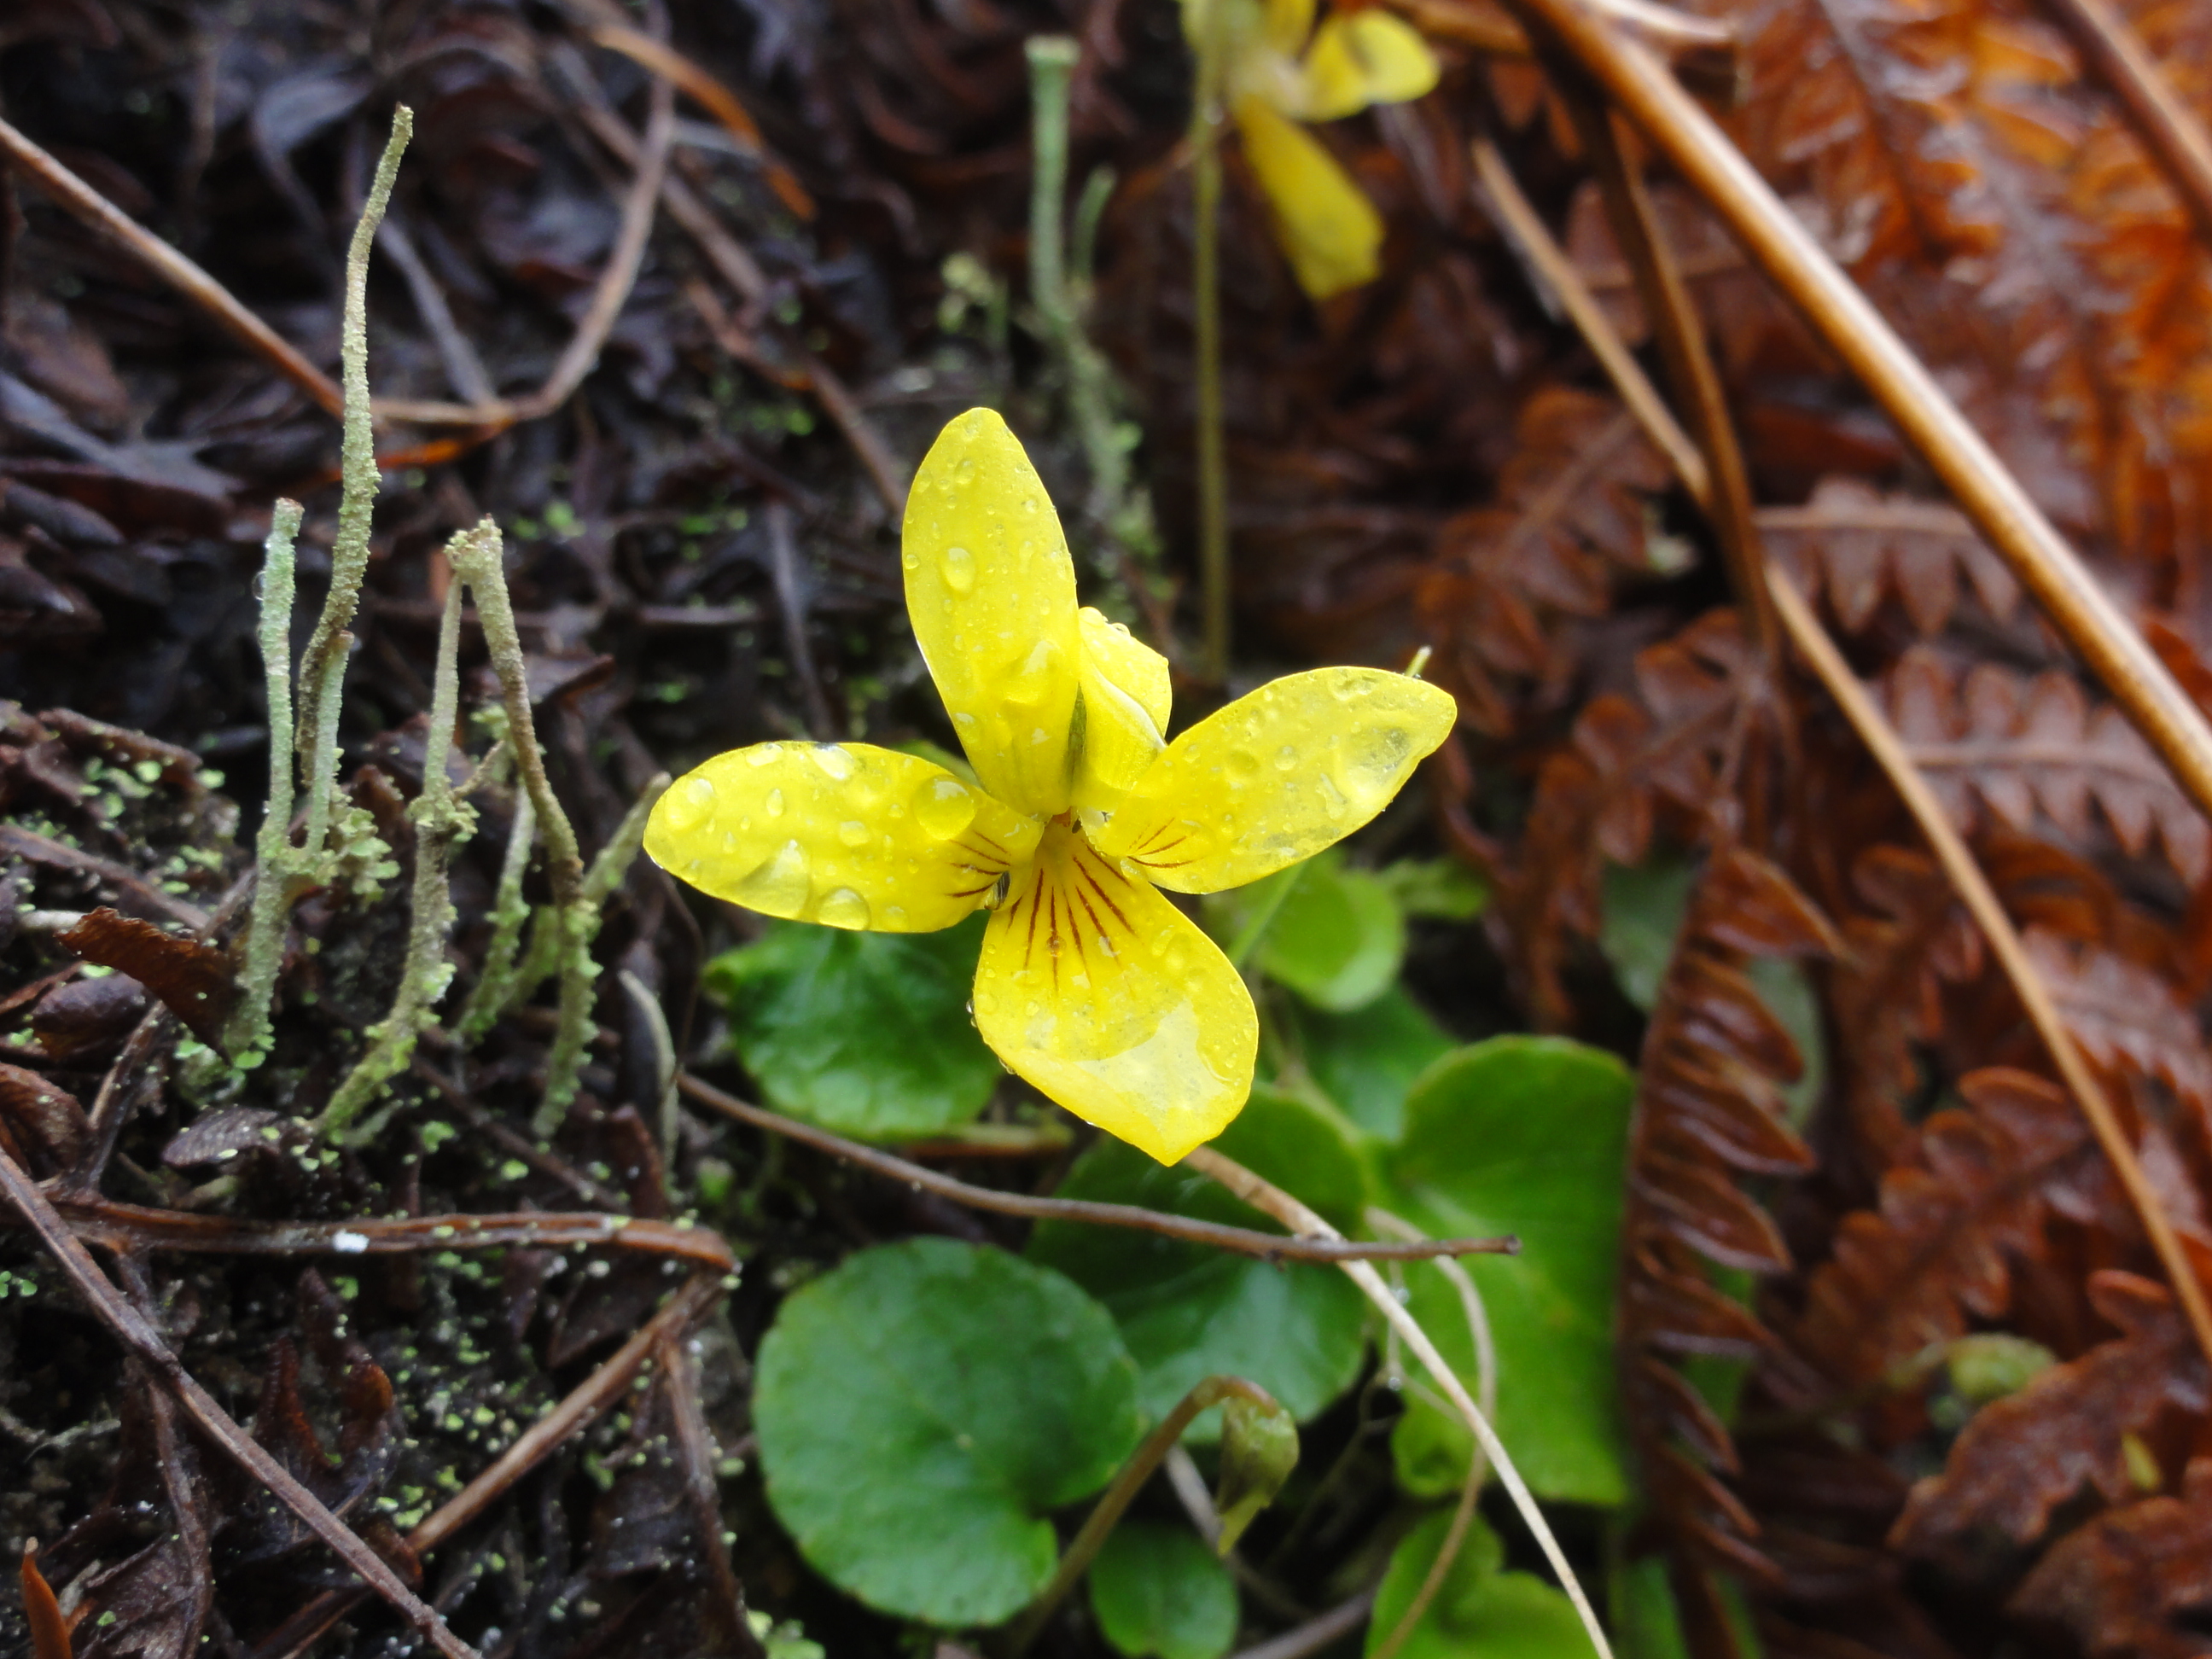 Violets bloom in White Creek Conservation Area in the spring. Photograph credit: Skagit Land Trust staff.